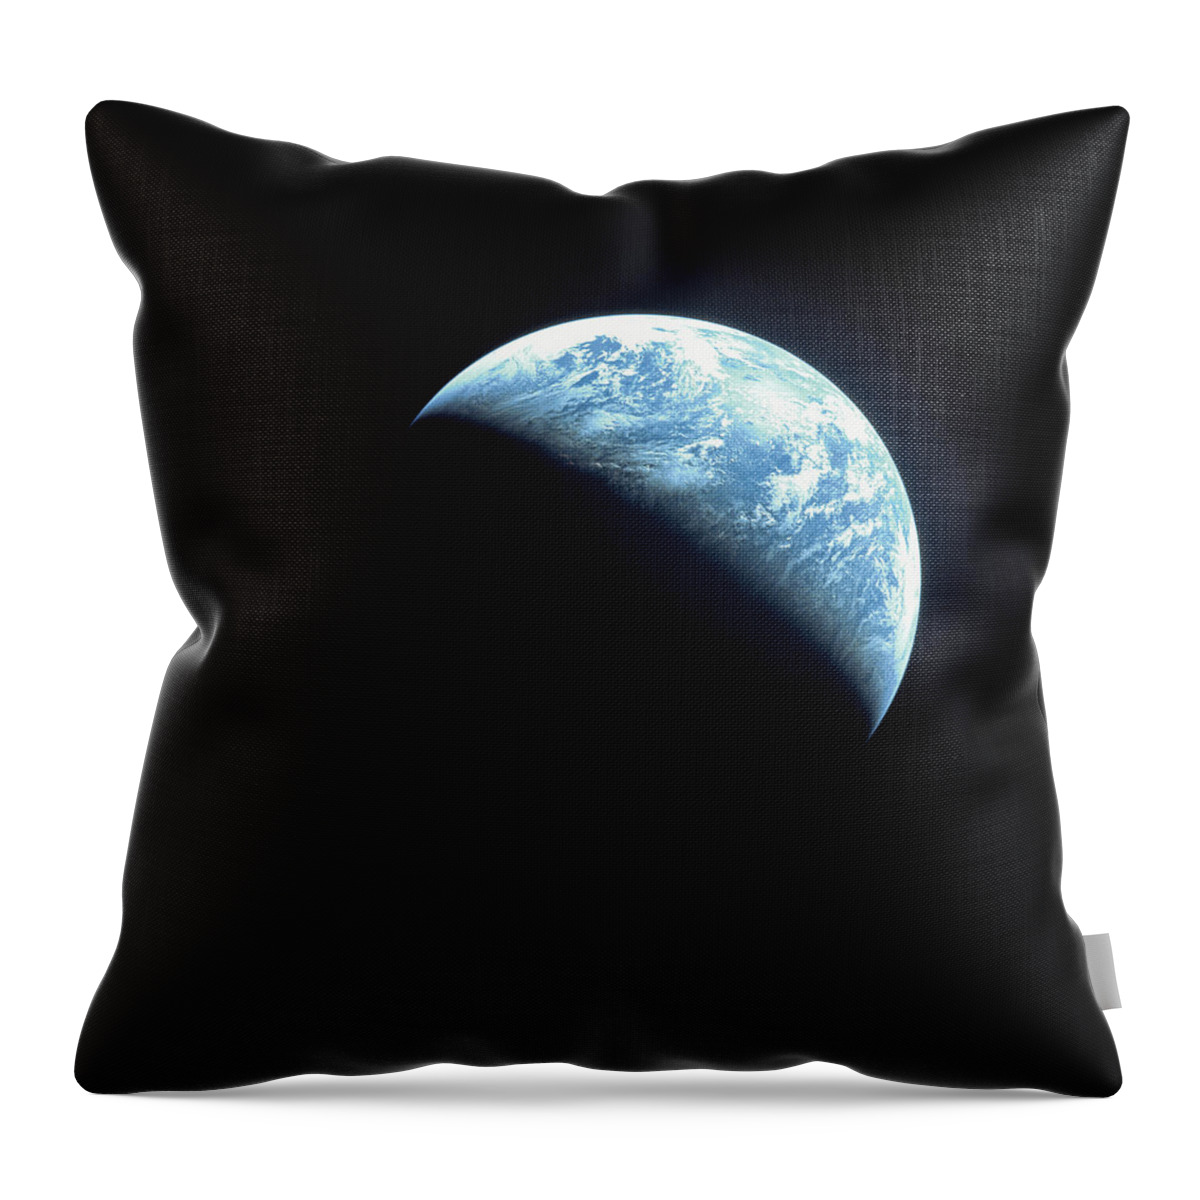 Black Color Throw Pillow featuring the photograph Satellite View Of A Partially Hidden by Stockbyte